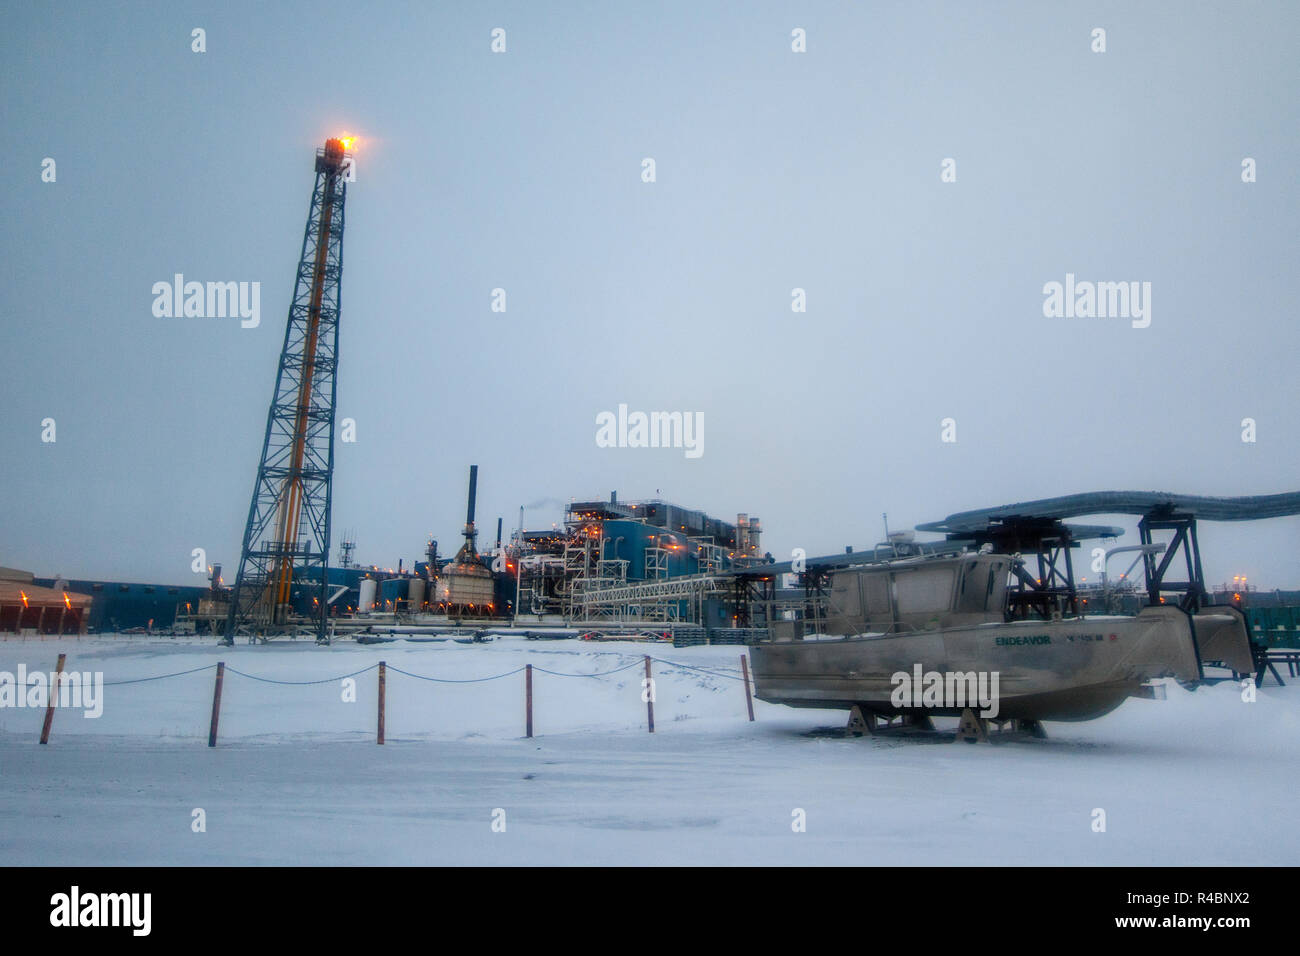 A pilot flame at the oil production facility on the artificial island Endicott outside Prudhoe Bay. Unlike a flaring tower, the pilot flame act as a security measure. Stock Photo